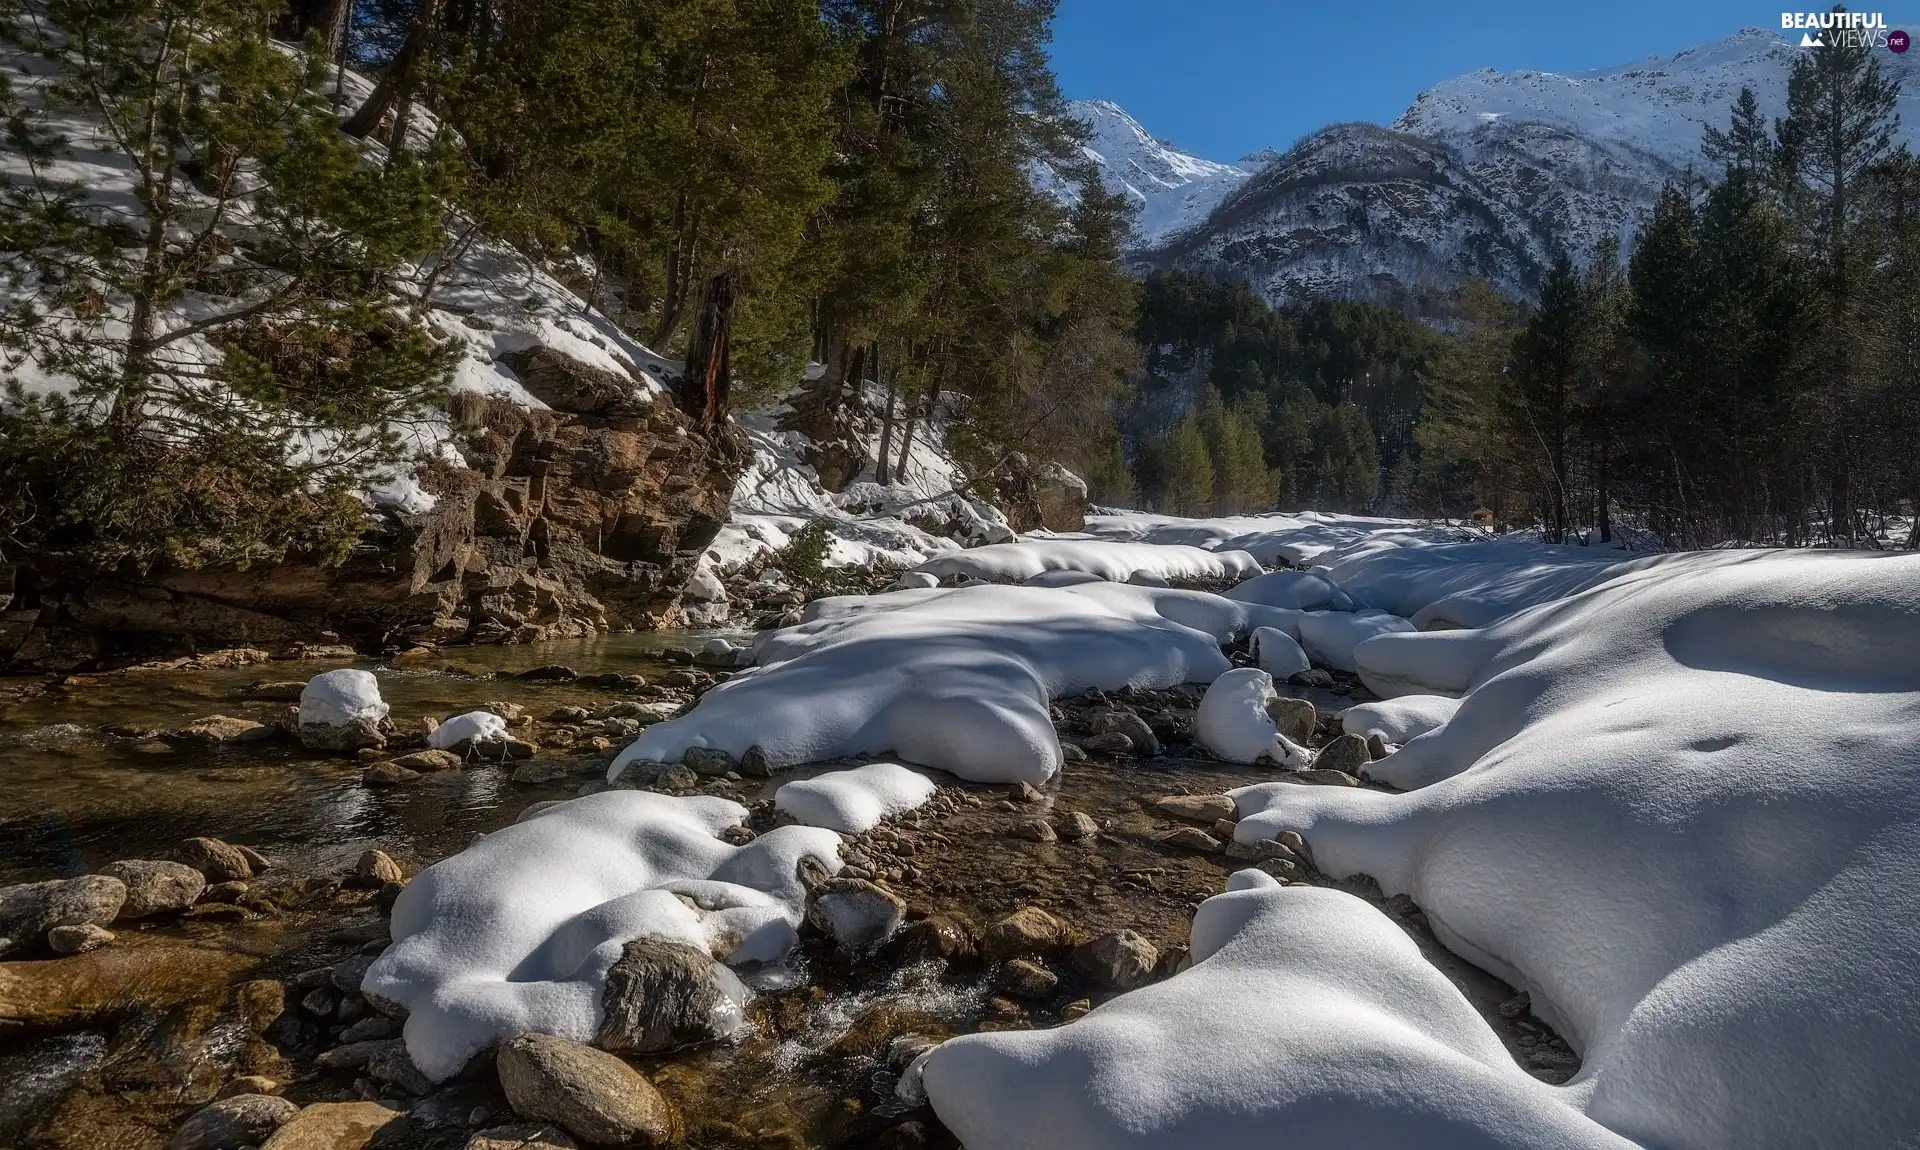 River, rocks, trees, Stones, Mountains, snow, viewes